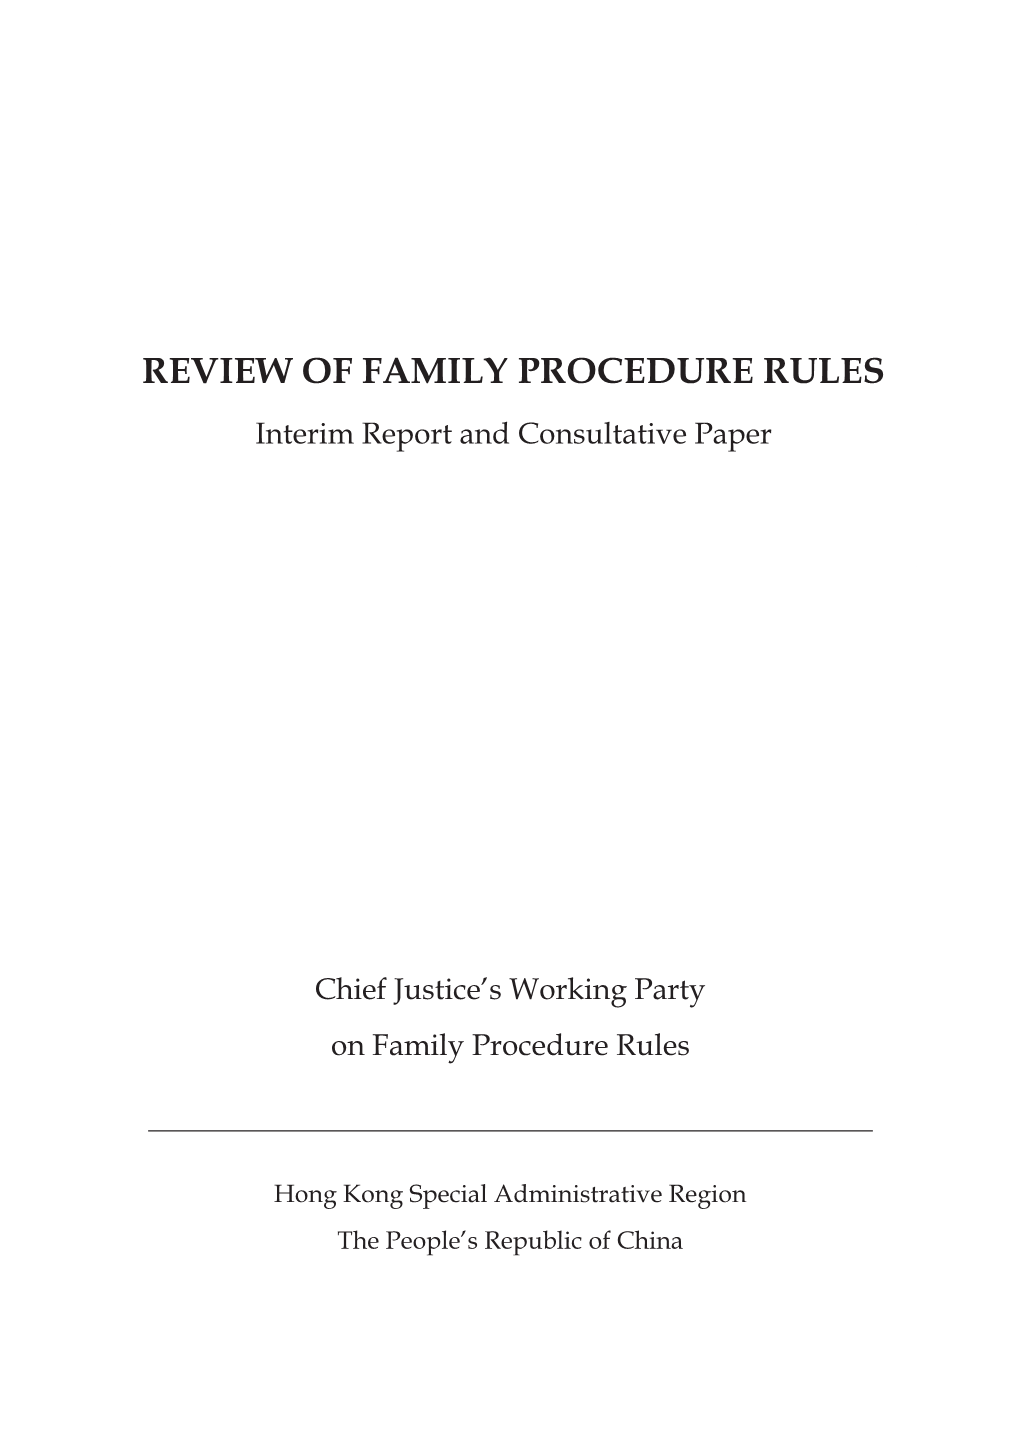 Review of Family Procedure Rules